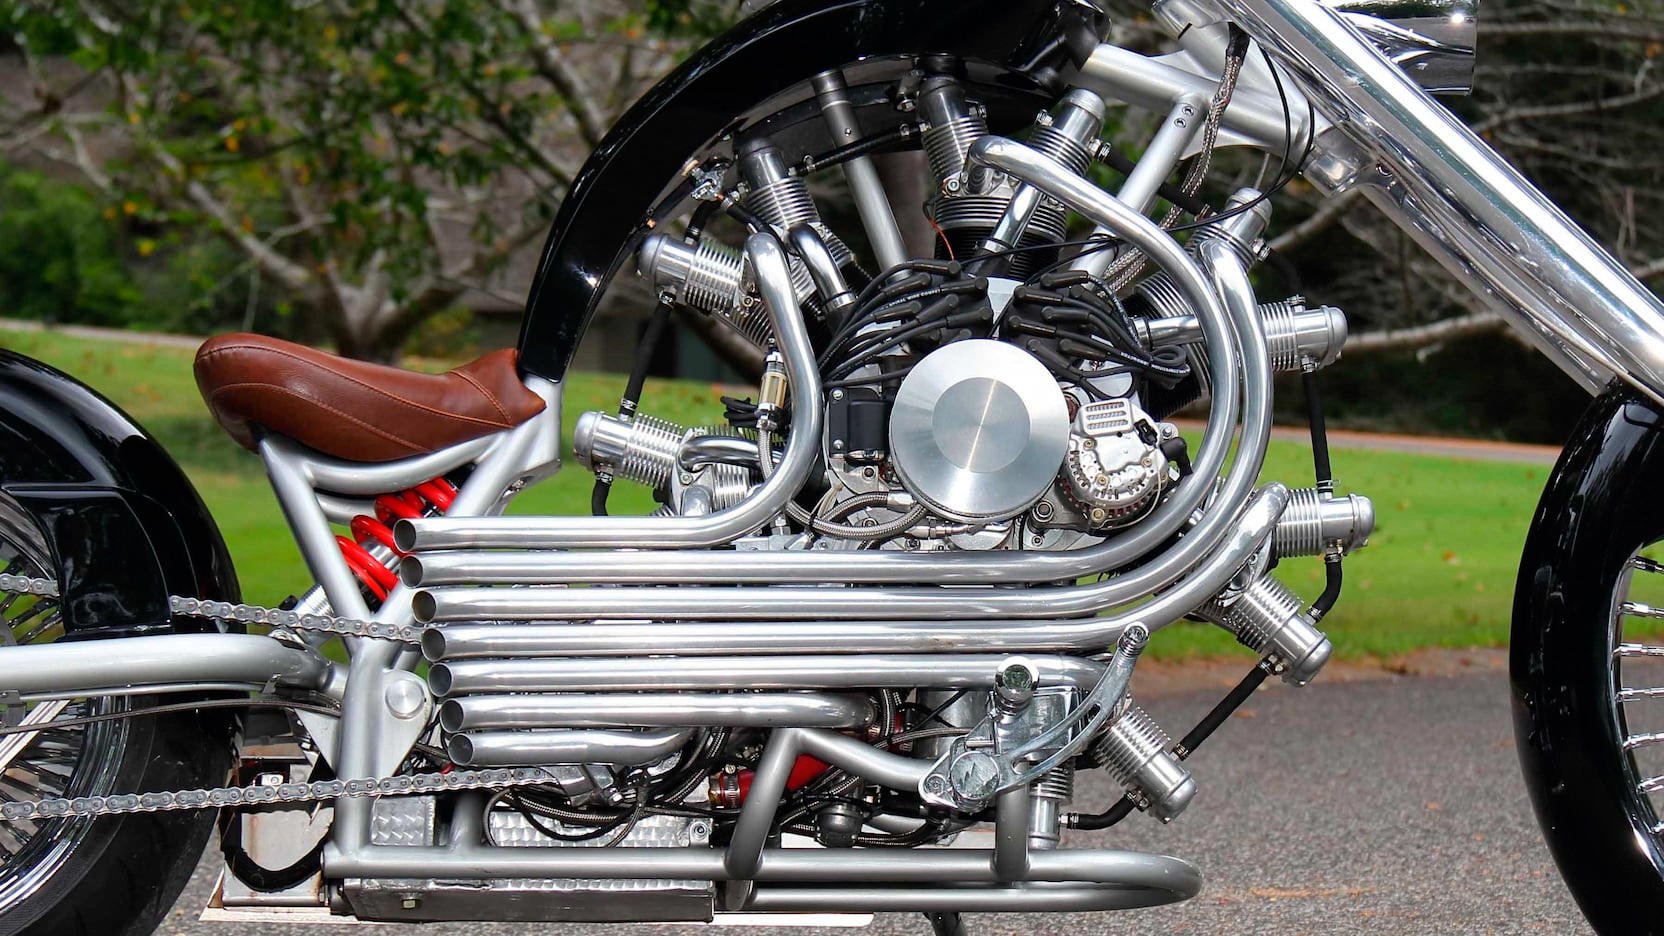 Jrl Cycles Lucky 7 A Radial Engined Production Motorcycle